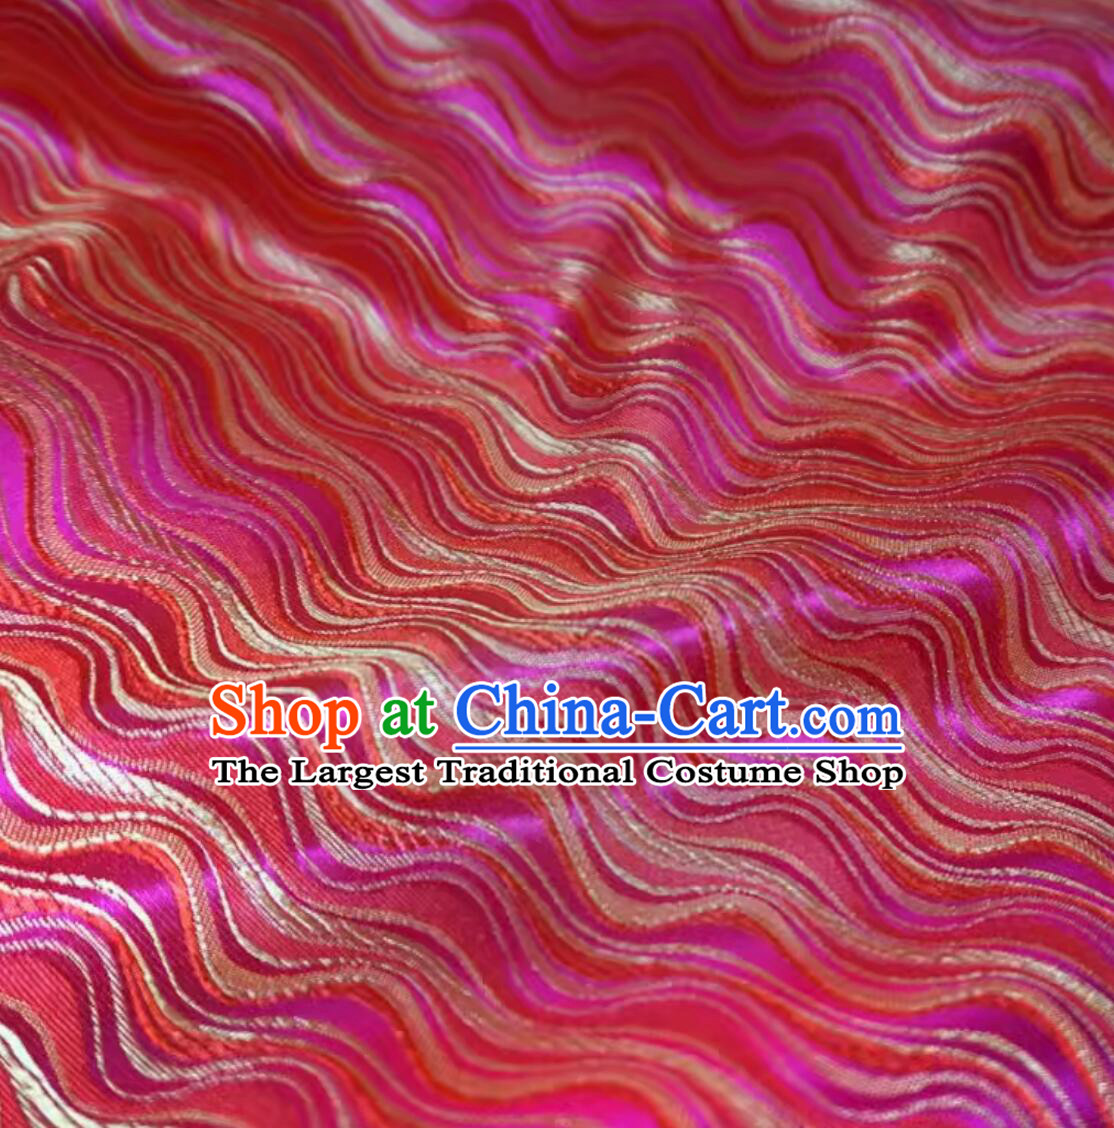 Chinese Traditional Hanfu Fabric Tang Suit Cloth Material Classical Waves Design Pattern Rosy Brocade